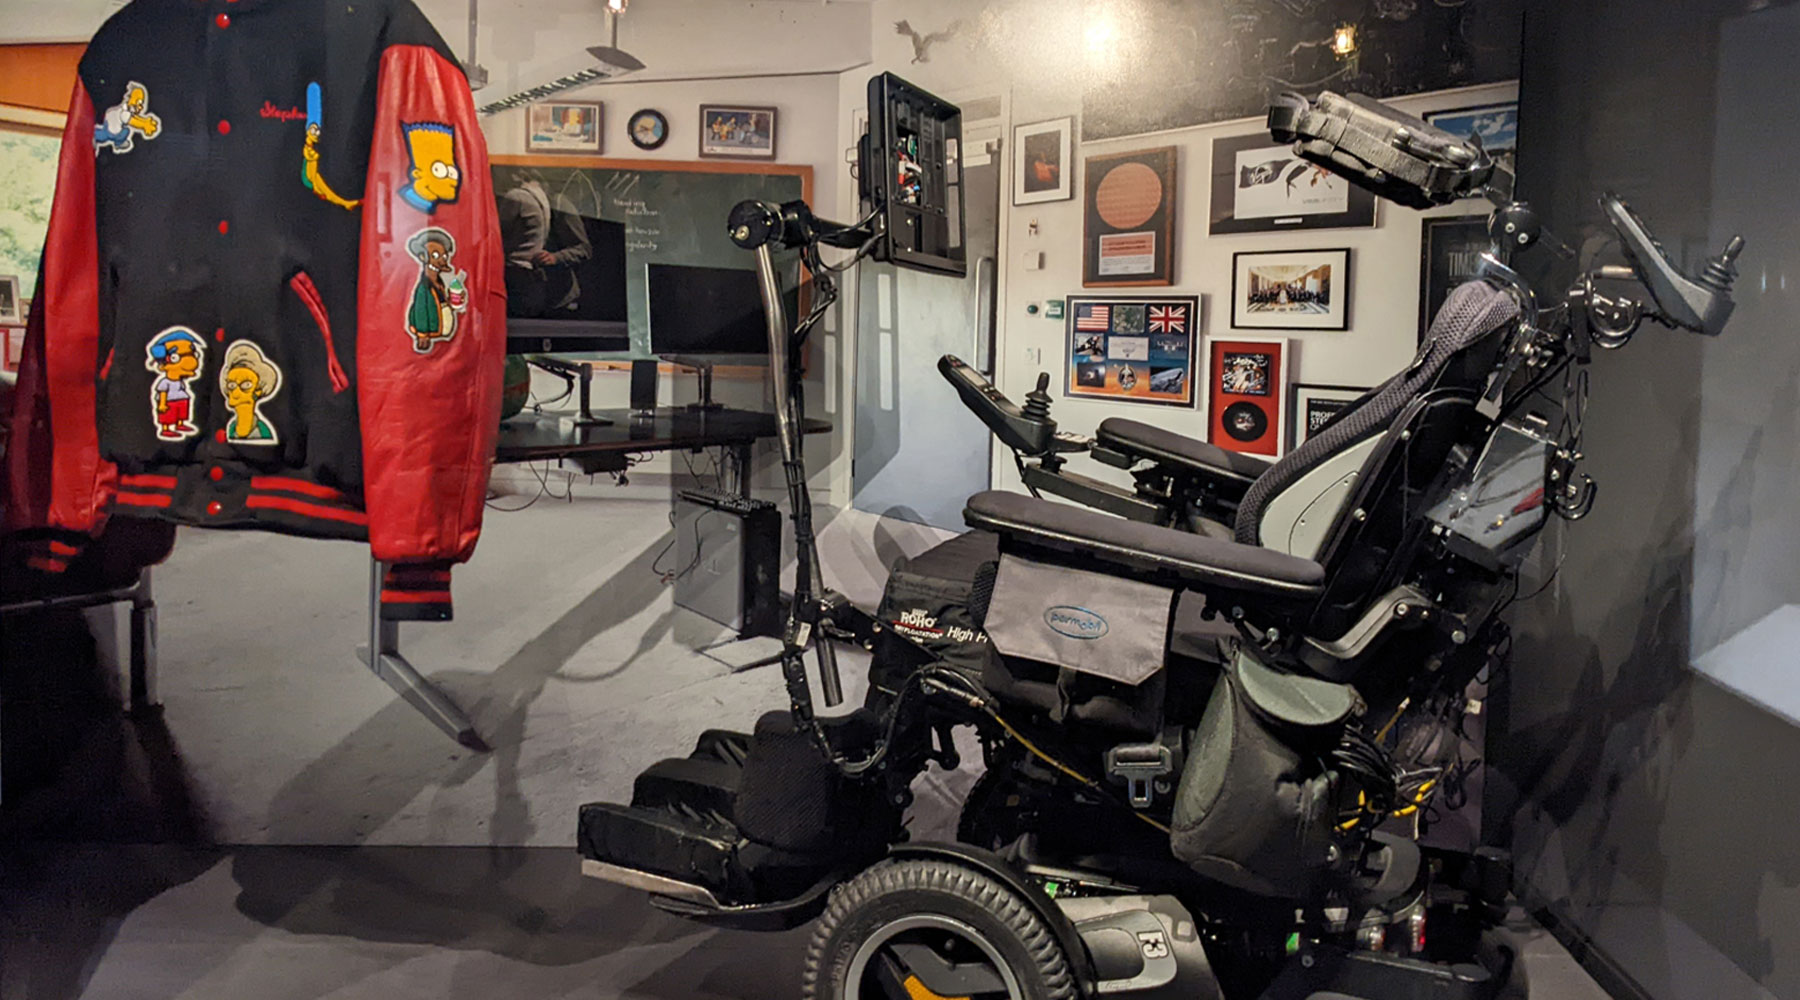 Stephen Hawkings exhibition opens at the Science Museum